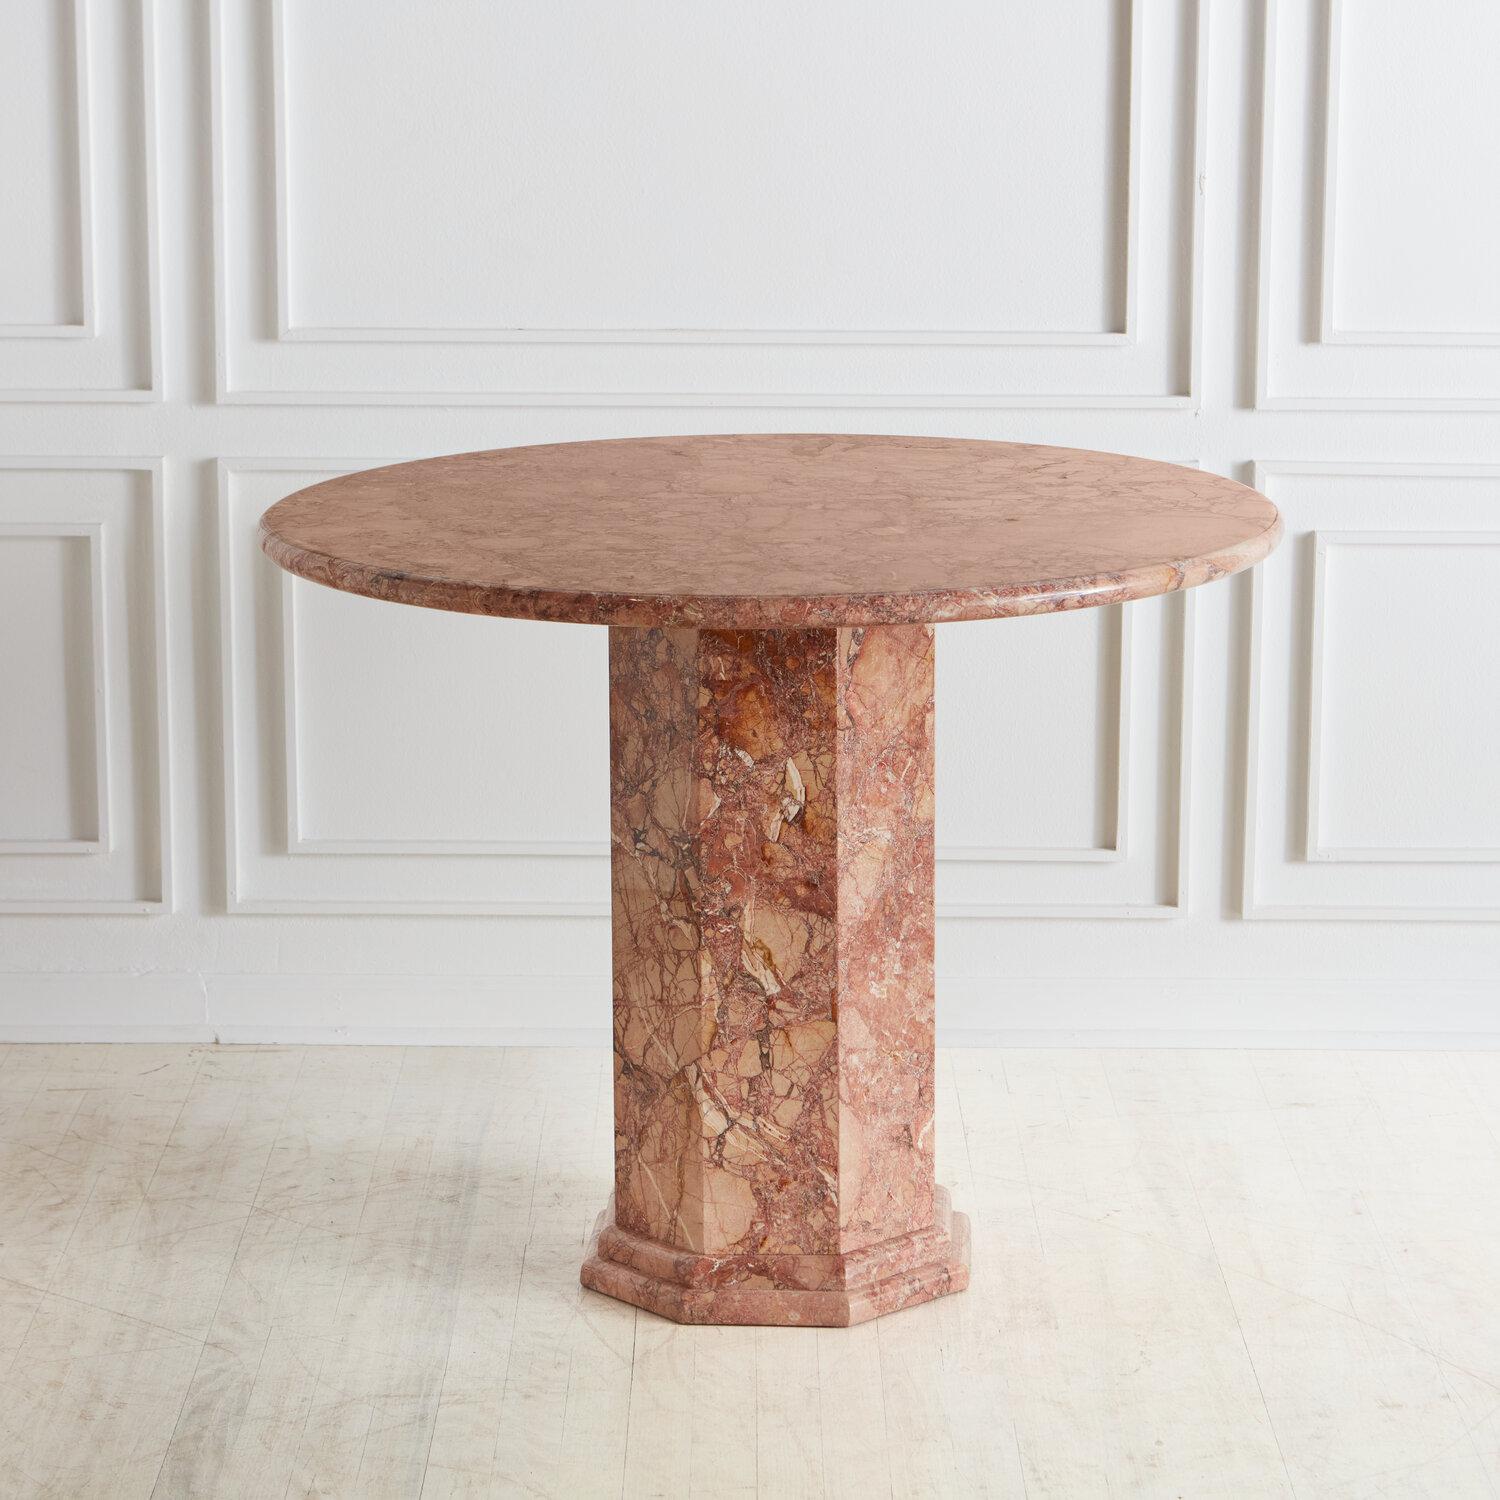 A stunning custom marble dining or entryway table designed in house by South Loop Loft. This table features a round top resting on a hexagonal mitered edge base with a banded-edge detail.

This table is available on a Made to Order Basis. It is